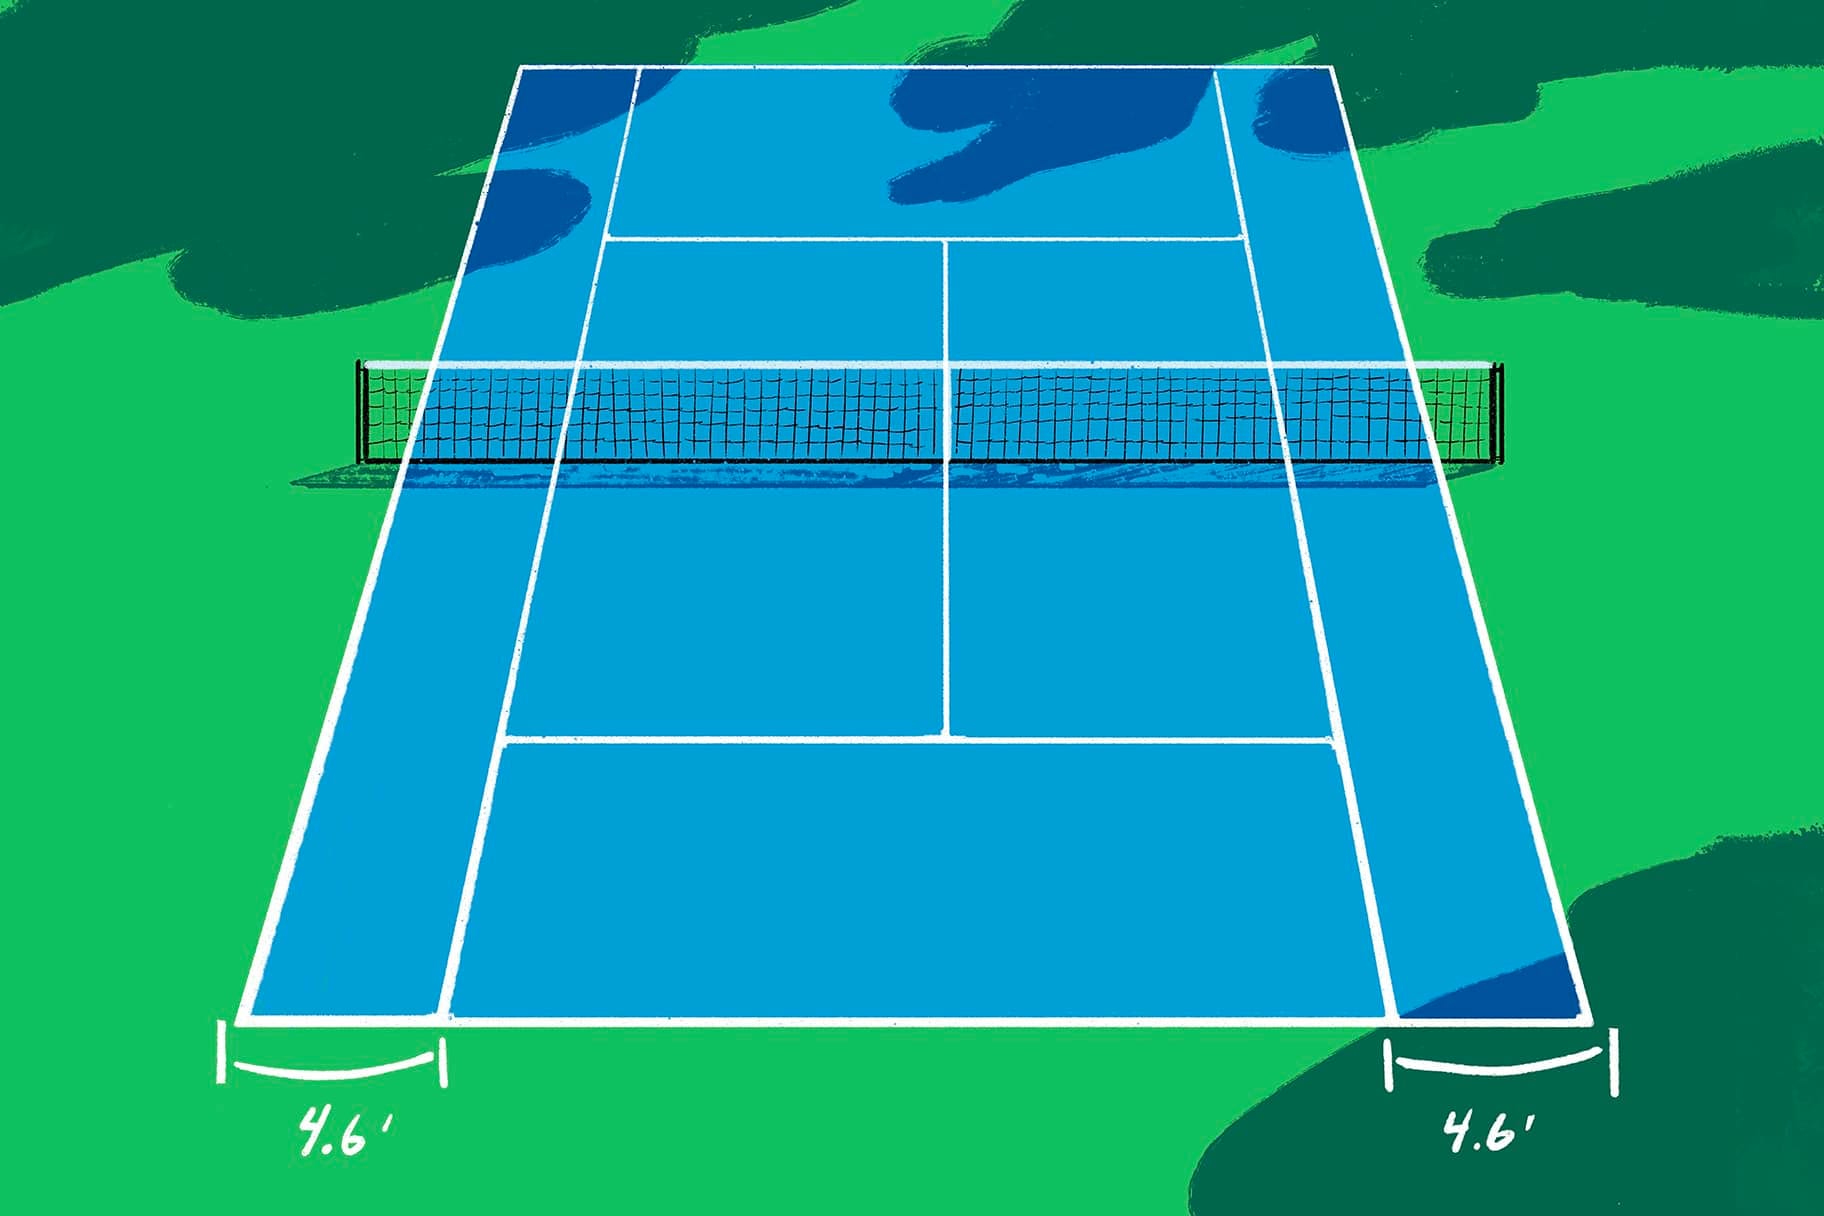 Tennis Scoring Simplified  Point System + How To Keep Score